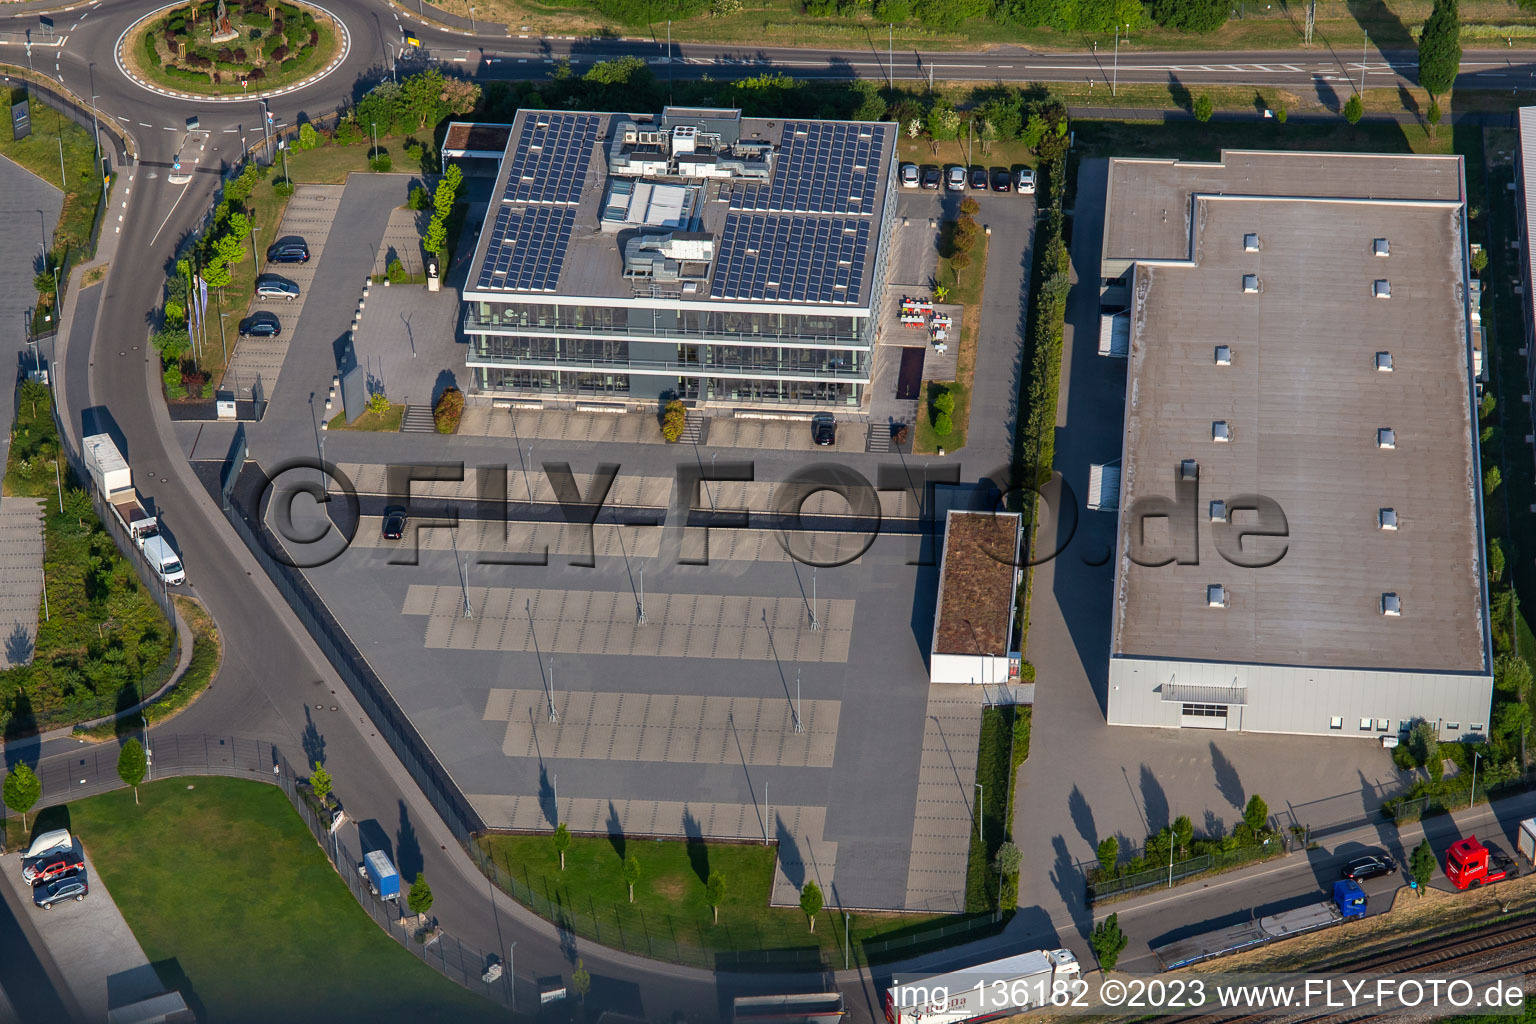 Aerial view of ITK Engineering GmbH in Rülzheim in the state Rhineland-Palatinate, Germany